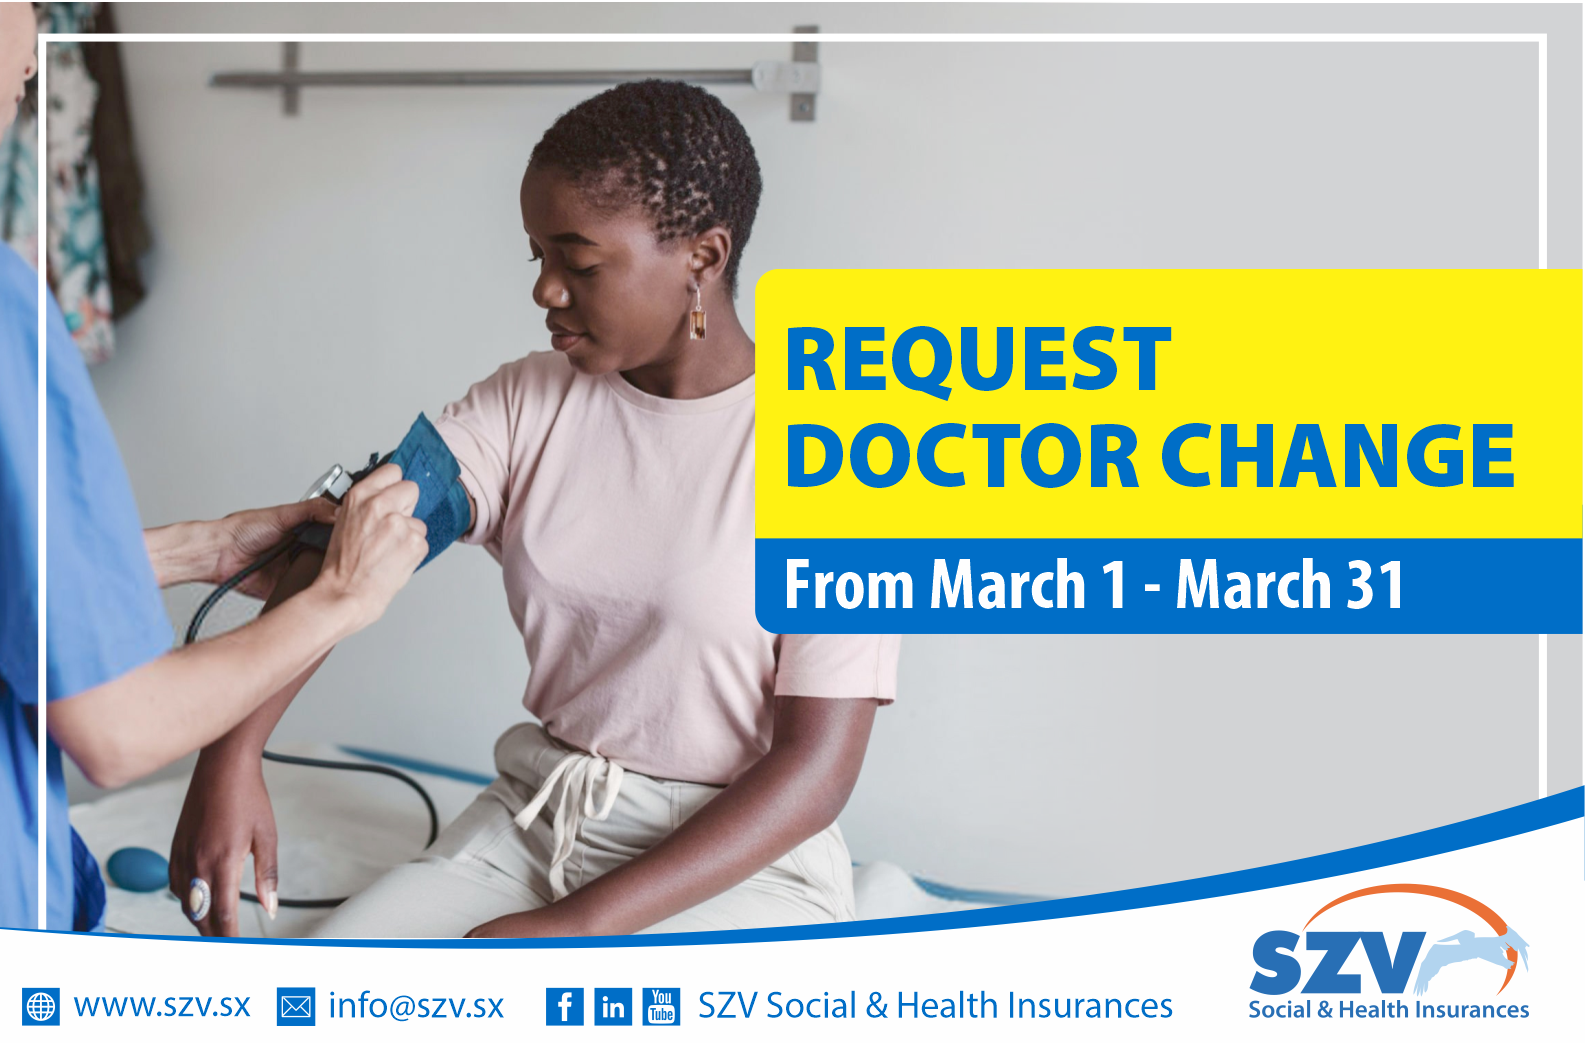 REQUEST DOCTOR CHANGE - MARCH 2023